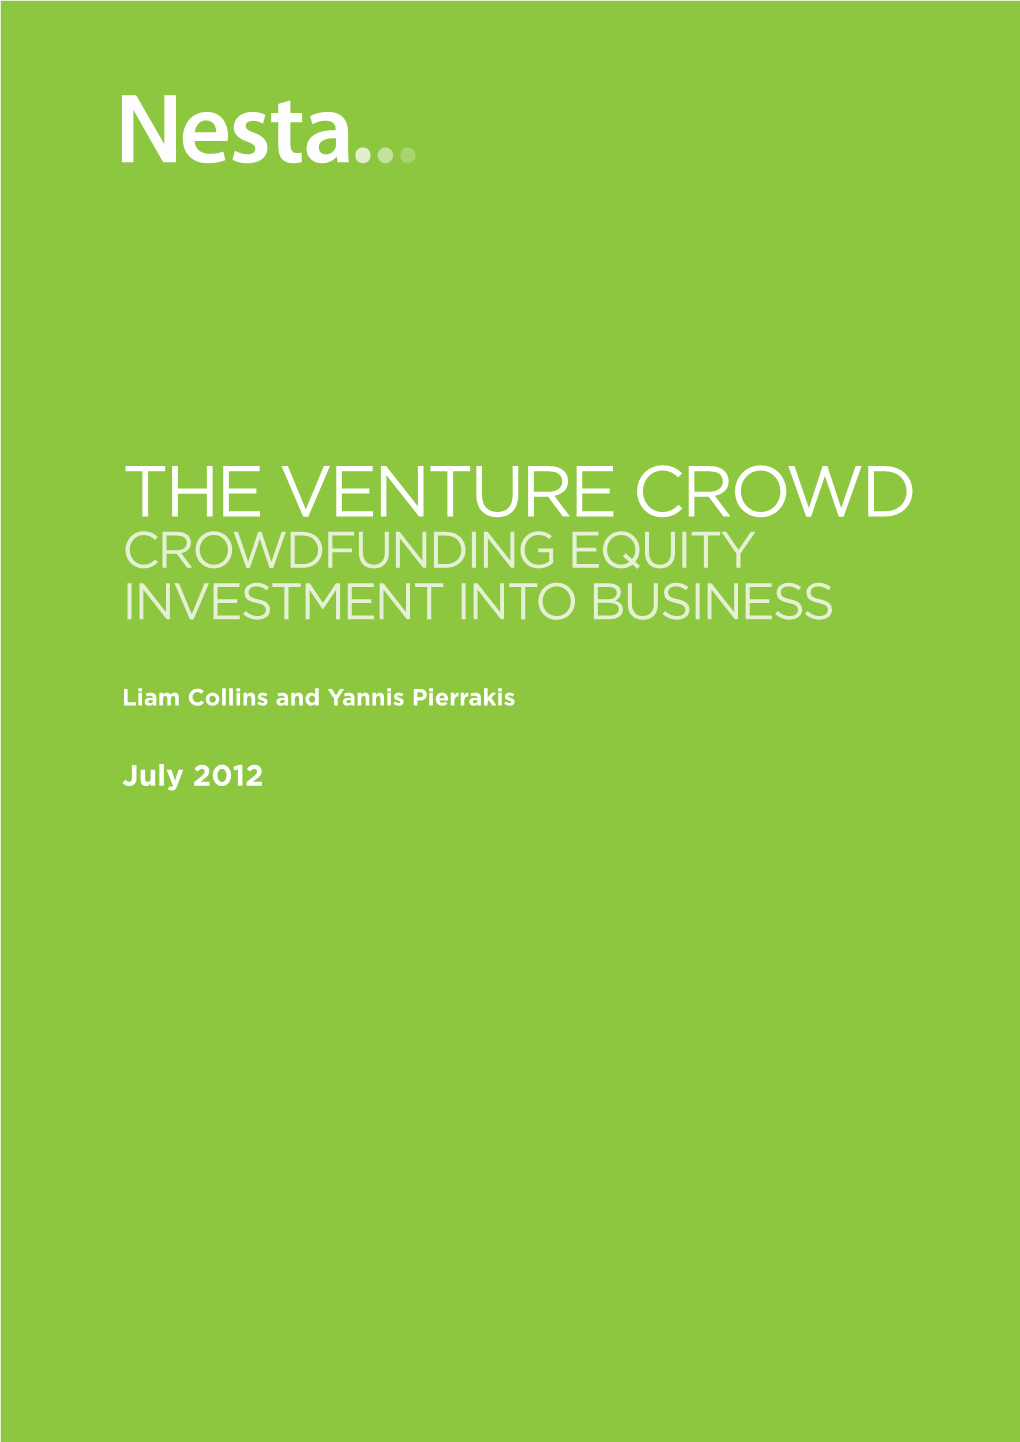 THE VENTURE CROWD Crowdfunding Equity Investment Into Business